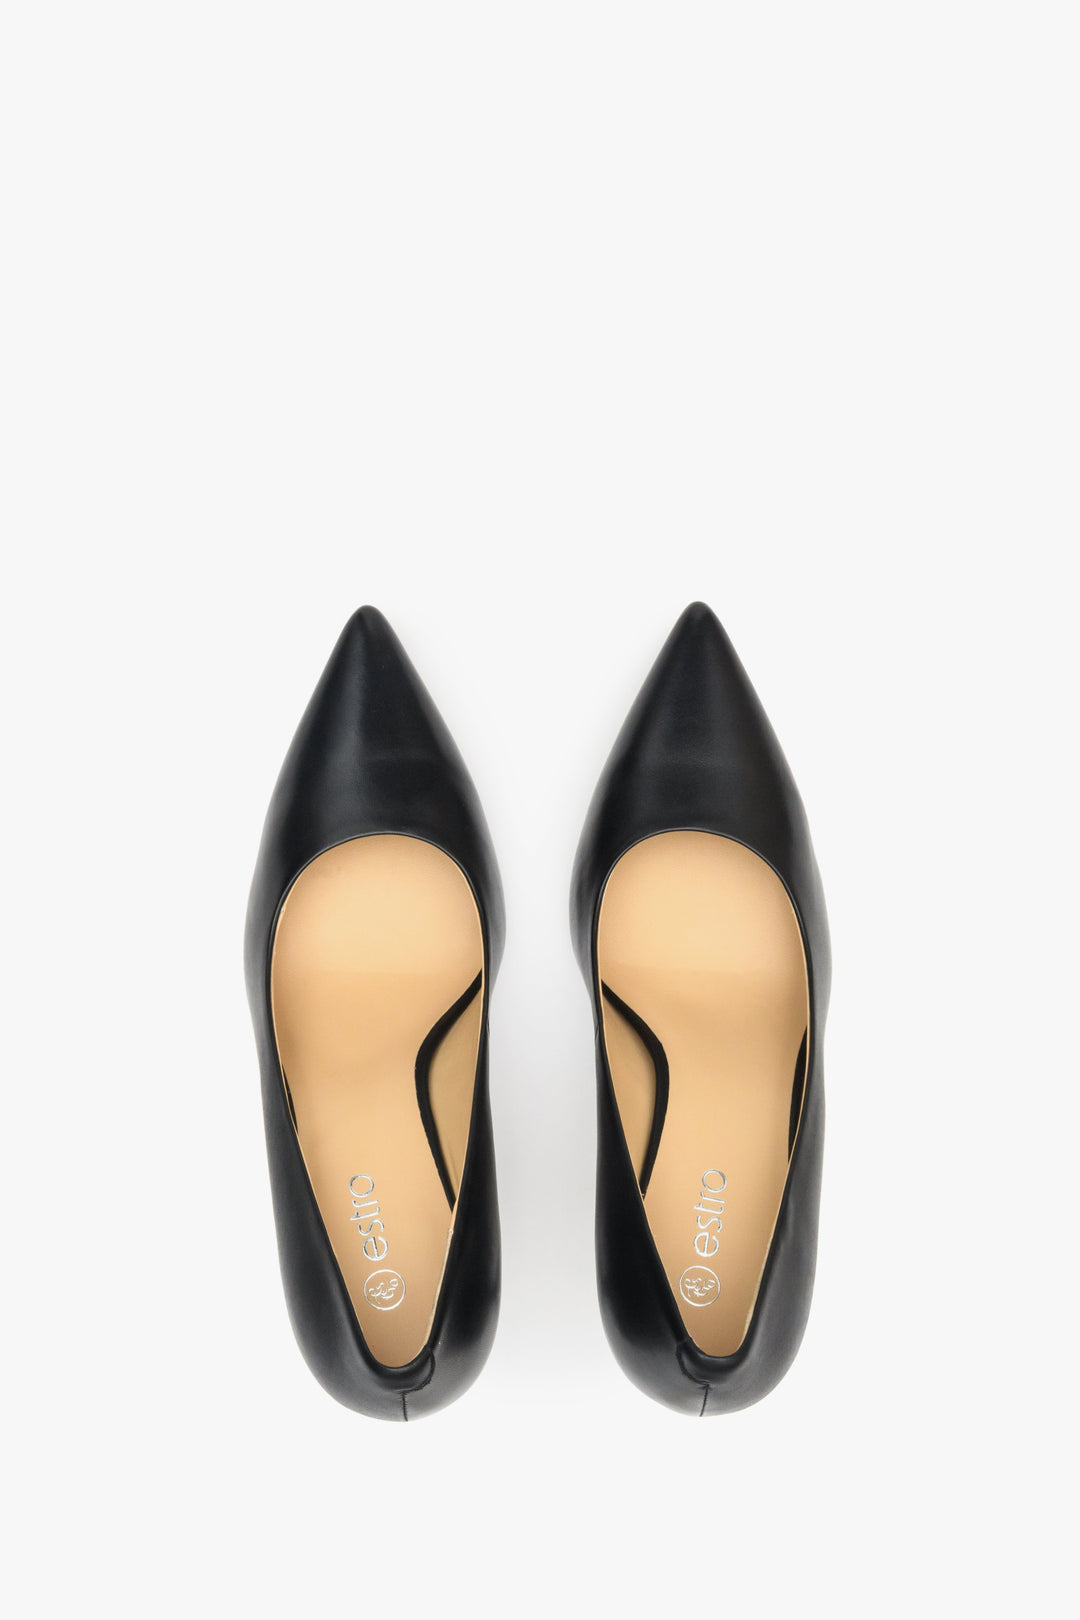 Women's black pointed heels with a tip, Estro, made of leather.